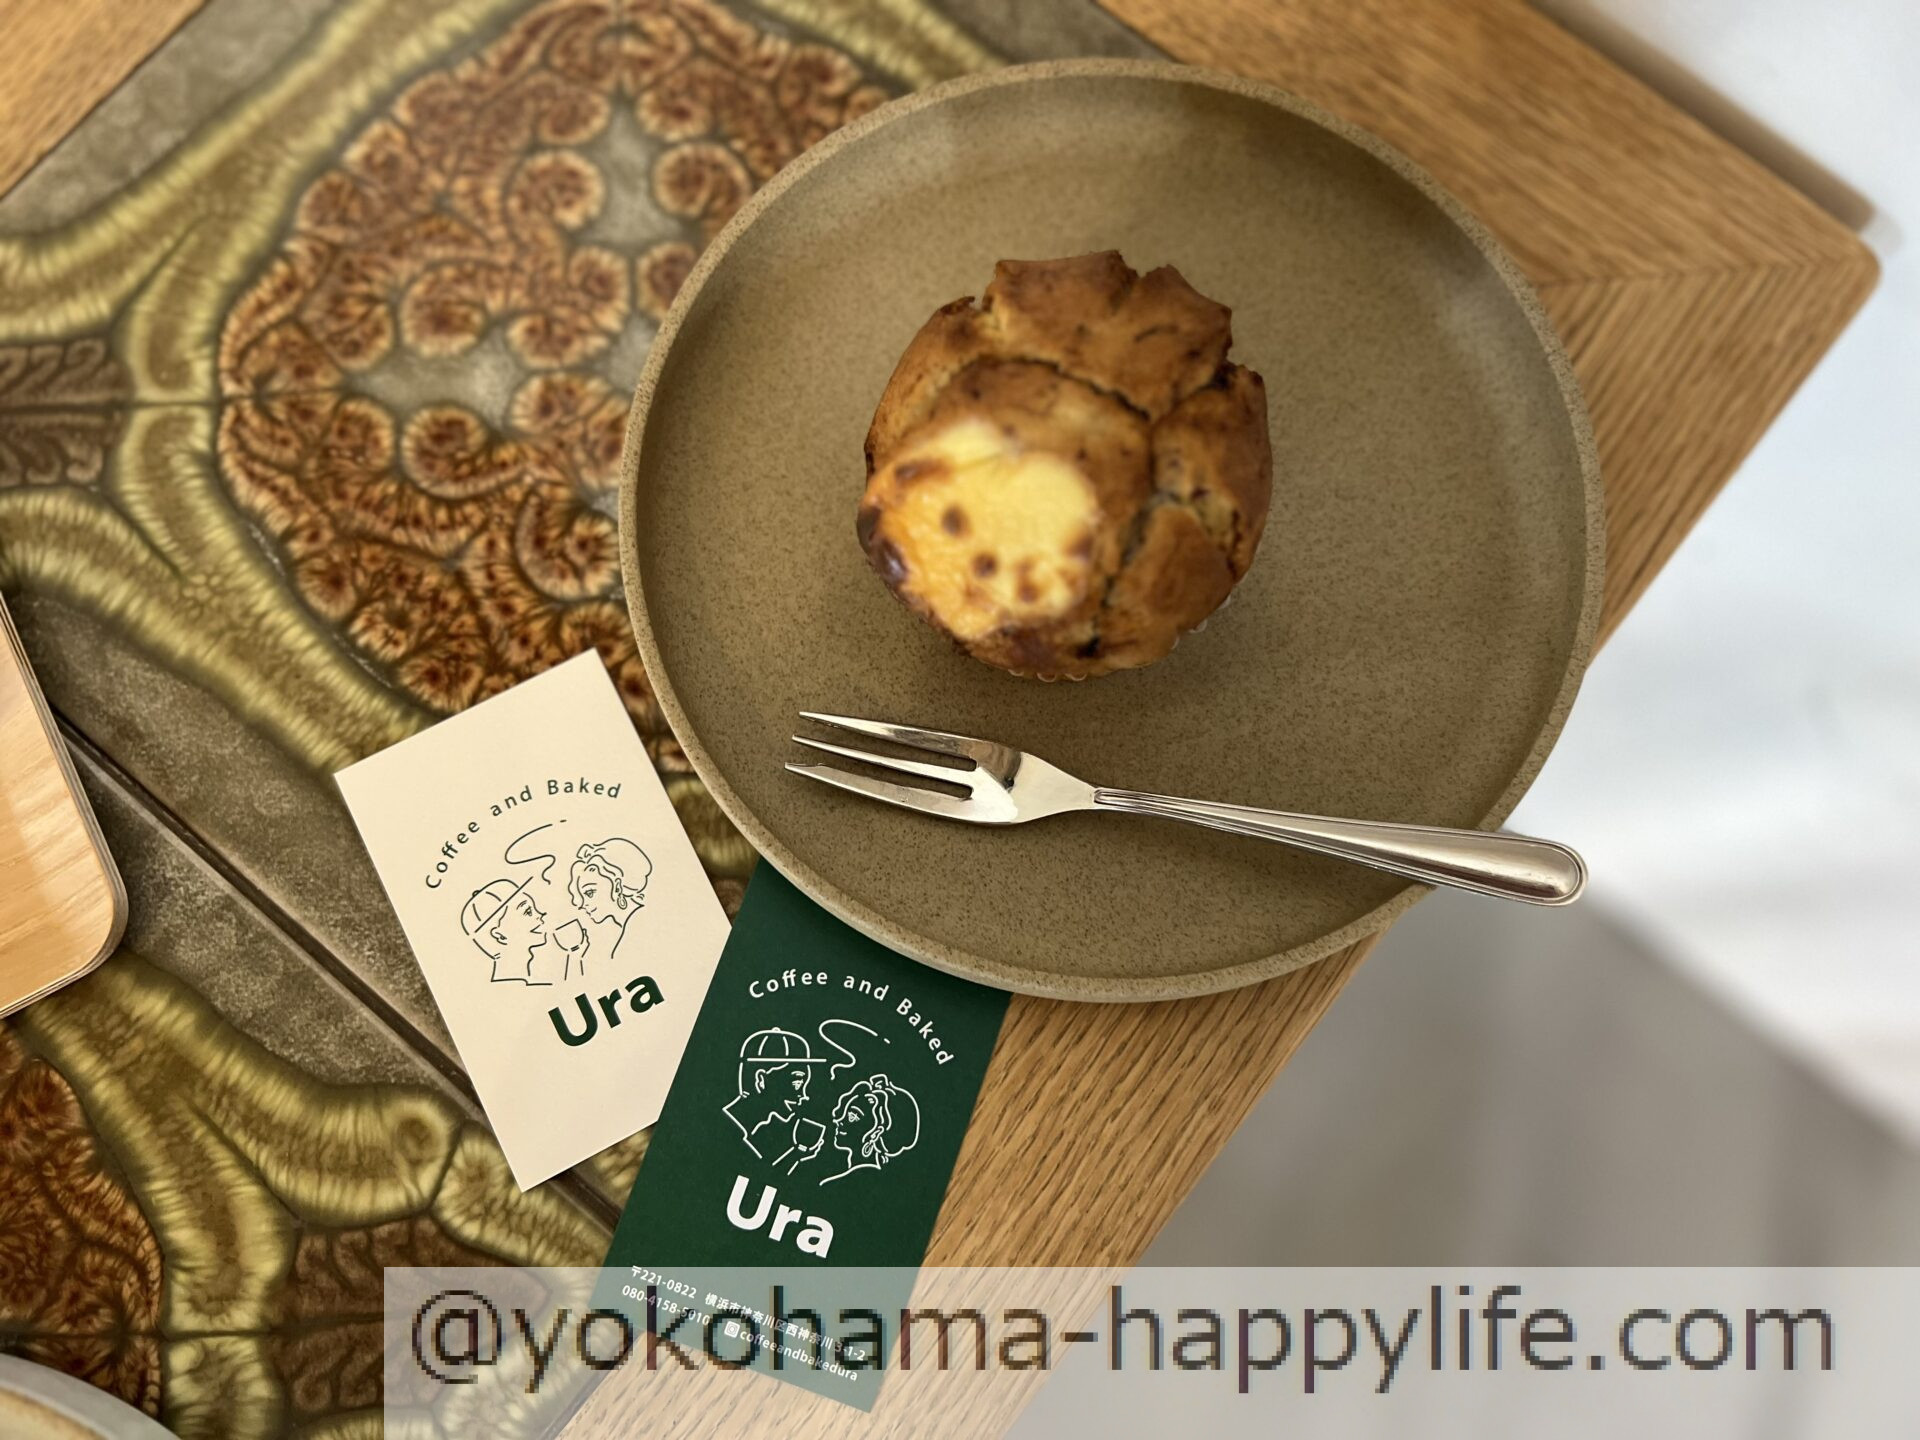 Coffee and Baked Ura ブルーベリークリームチーズマフィン